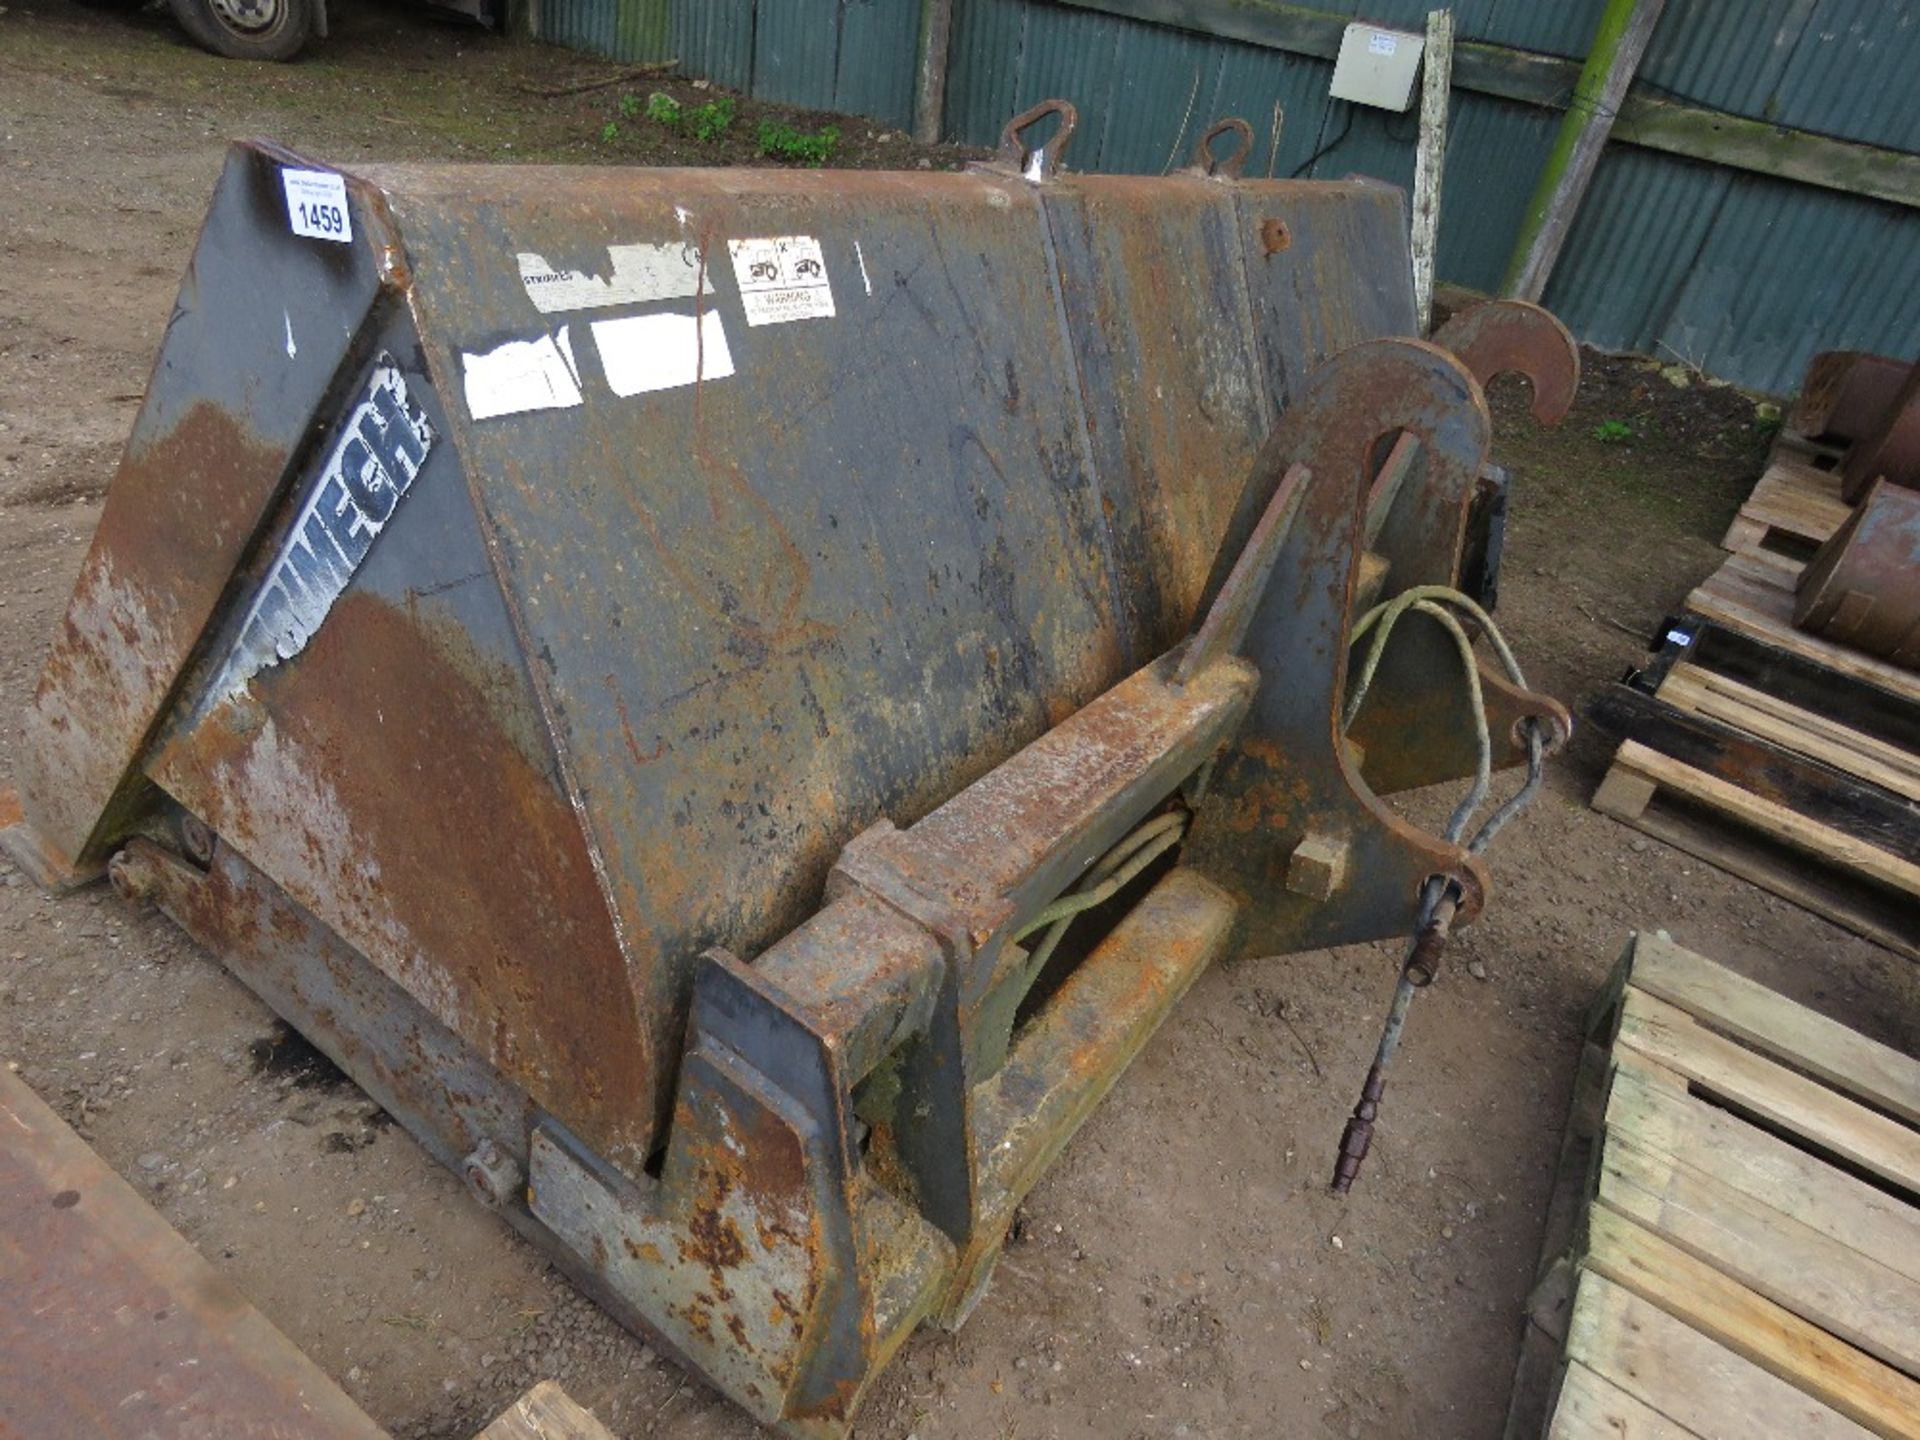 STRIMECH TOE TIP BUCKET, 2.4M WIDTHA PPROX, HEAVY DUTY BRACKETS FITTED. APPEARS LITTLE USED.....THIS - Image 5 of 7